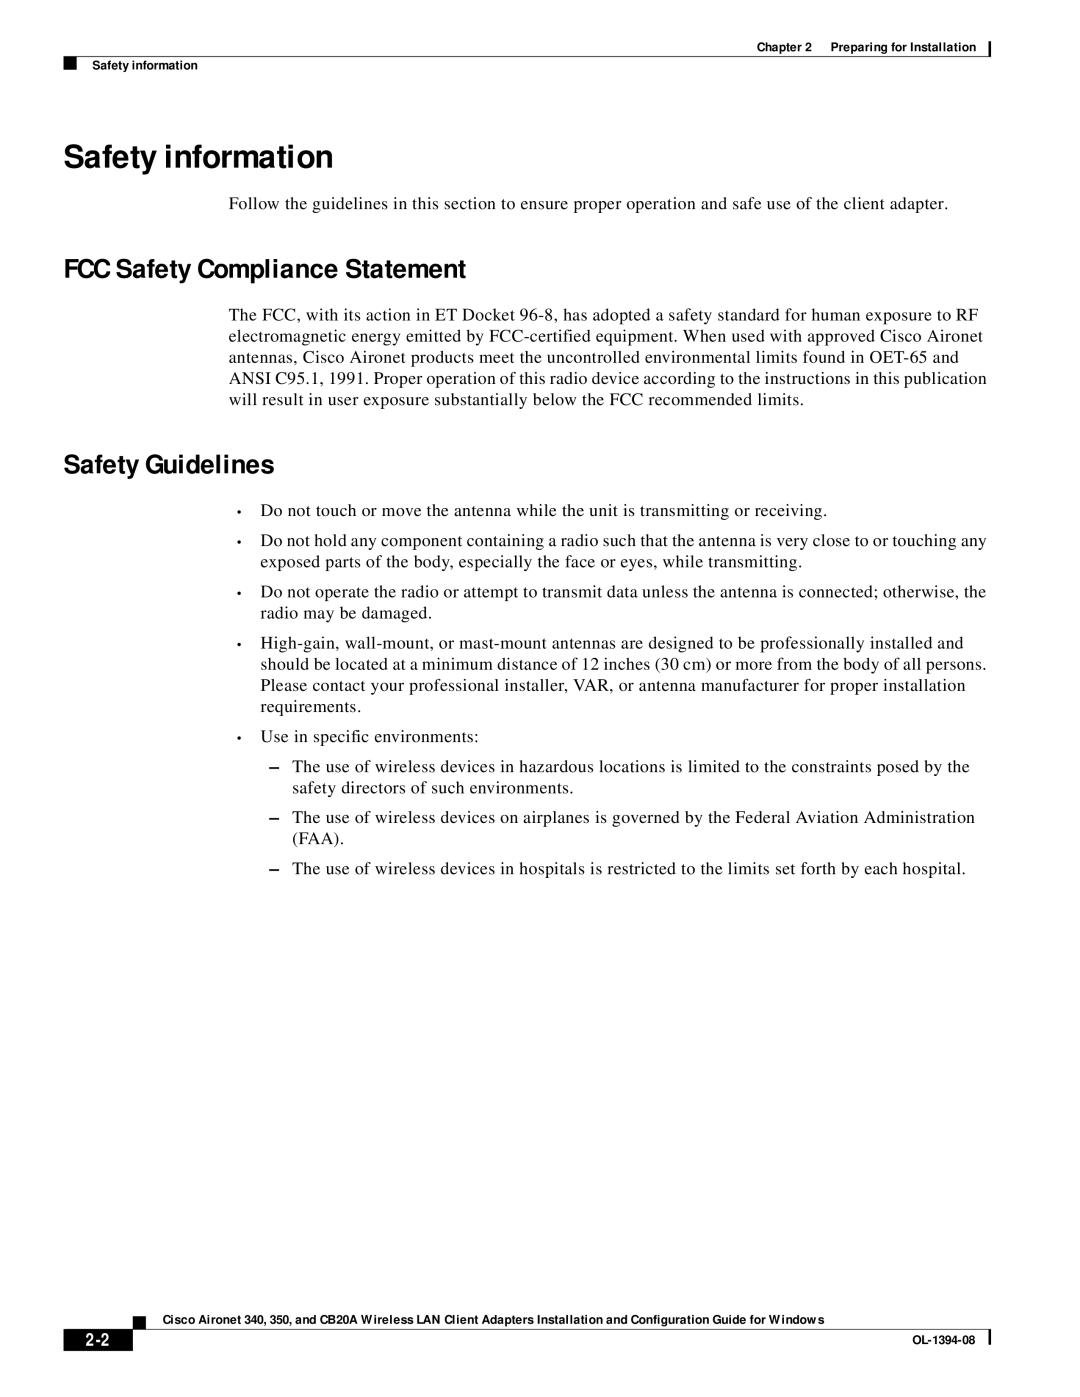 Cisco Systems 350, CB20A manual Safety information, FCC Safety Compliance Statement, Safety Guidelines 